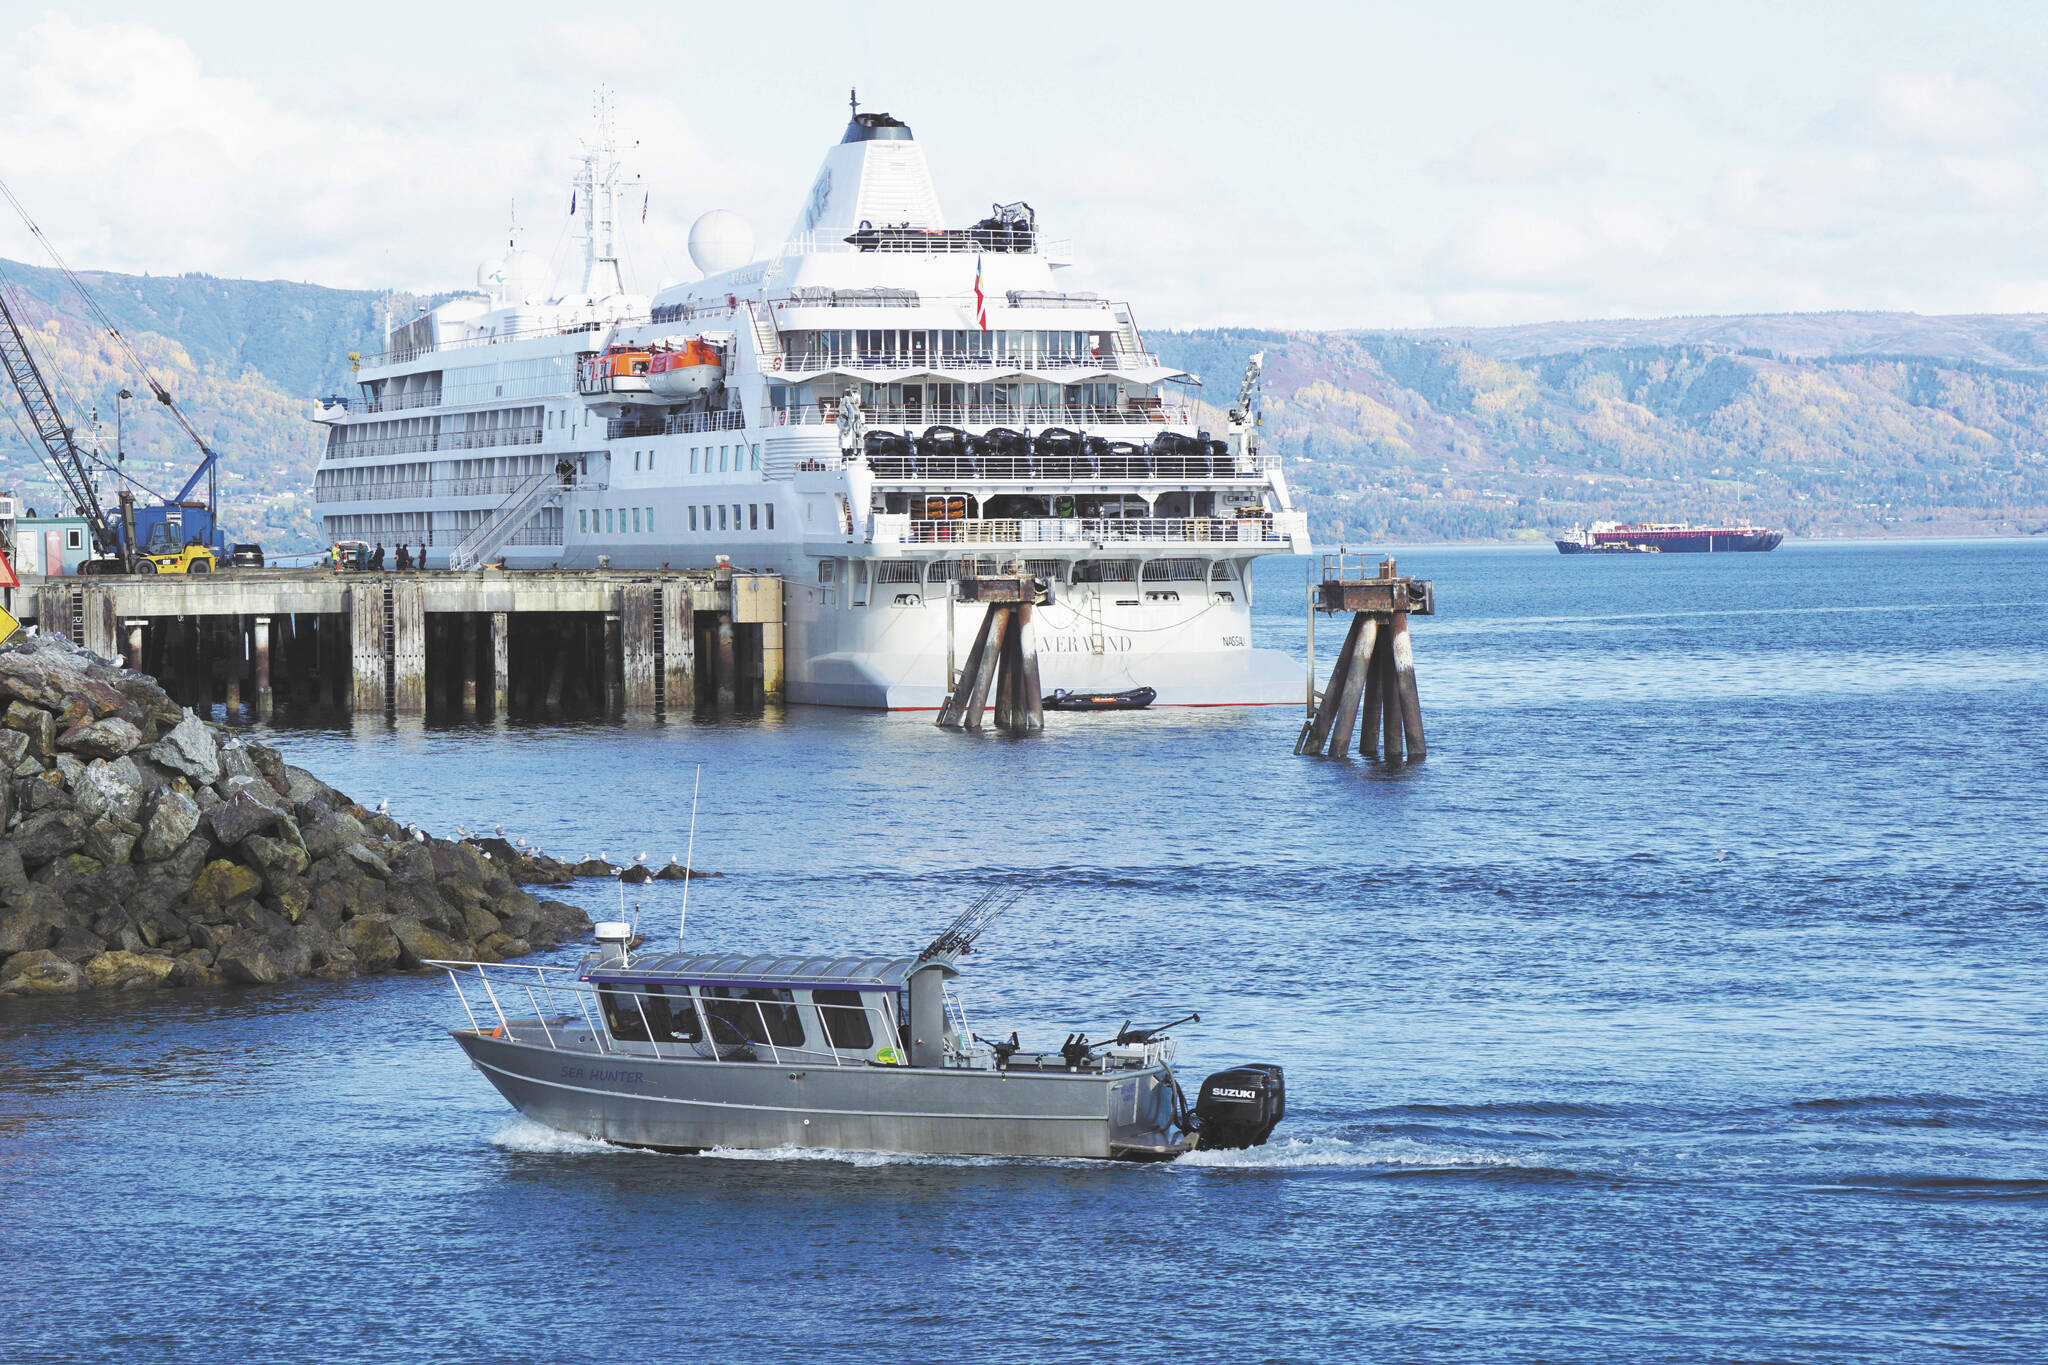 Photo by Michael Armstrong/Homer News 
A fishing boat passes the Silversea cruise ship Silver Wind as the boat enters the Homer Harbor on Sunday, Sept. 25, 2022, in Homer, Alaska.